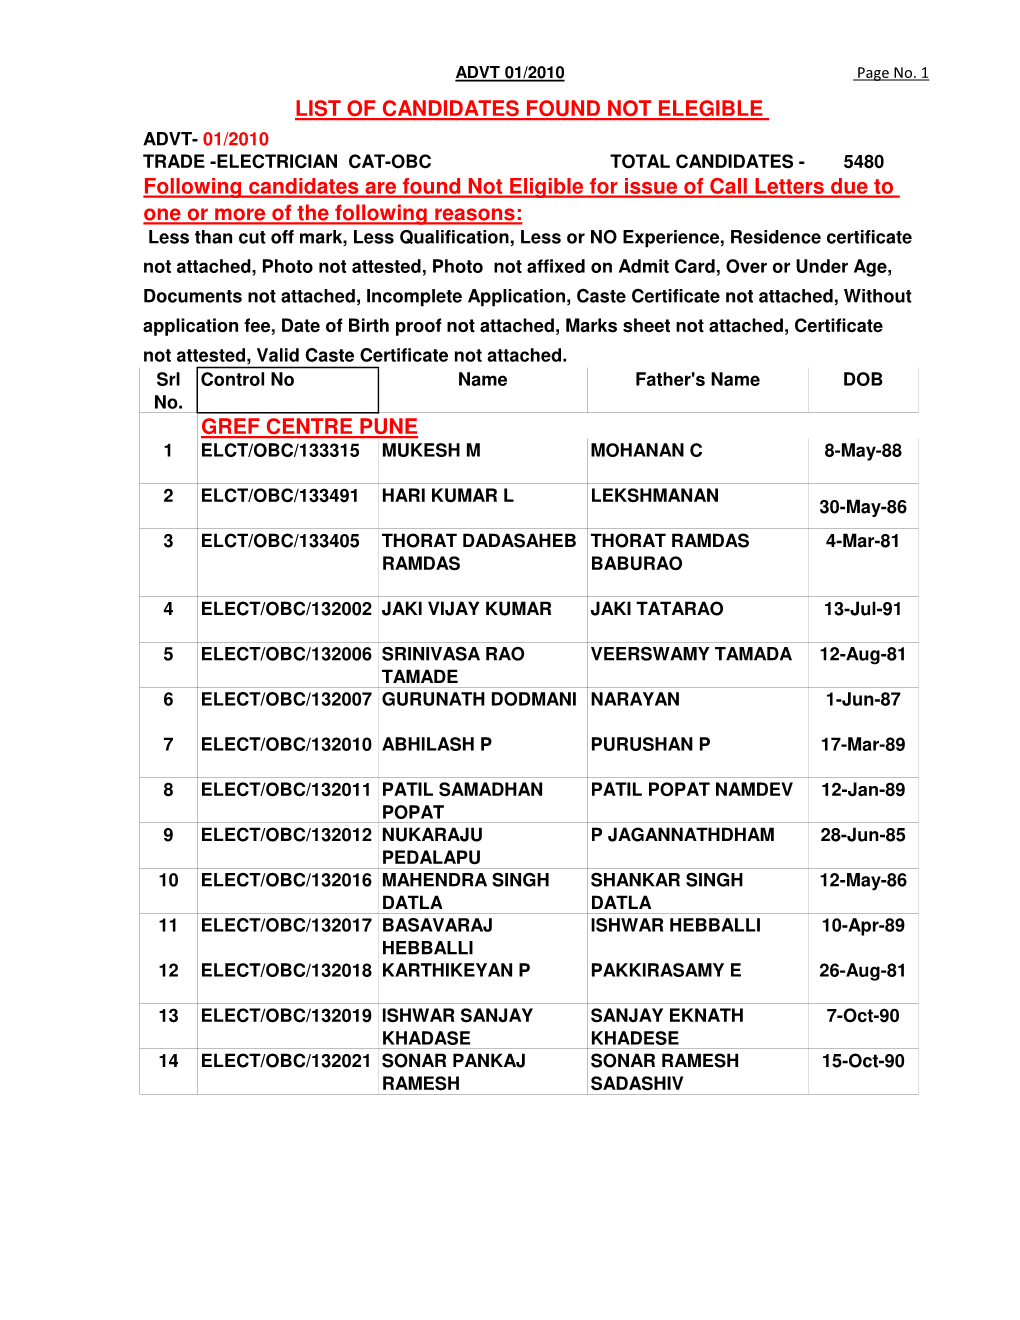 Gref Centre Pune List of Candidates Found Not